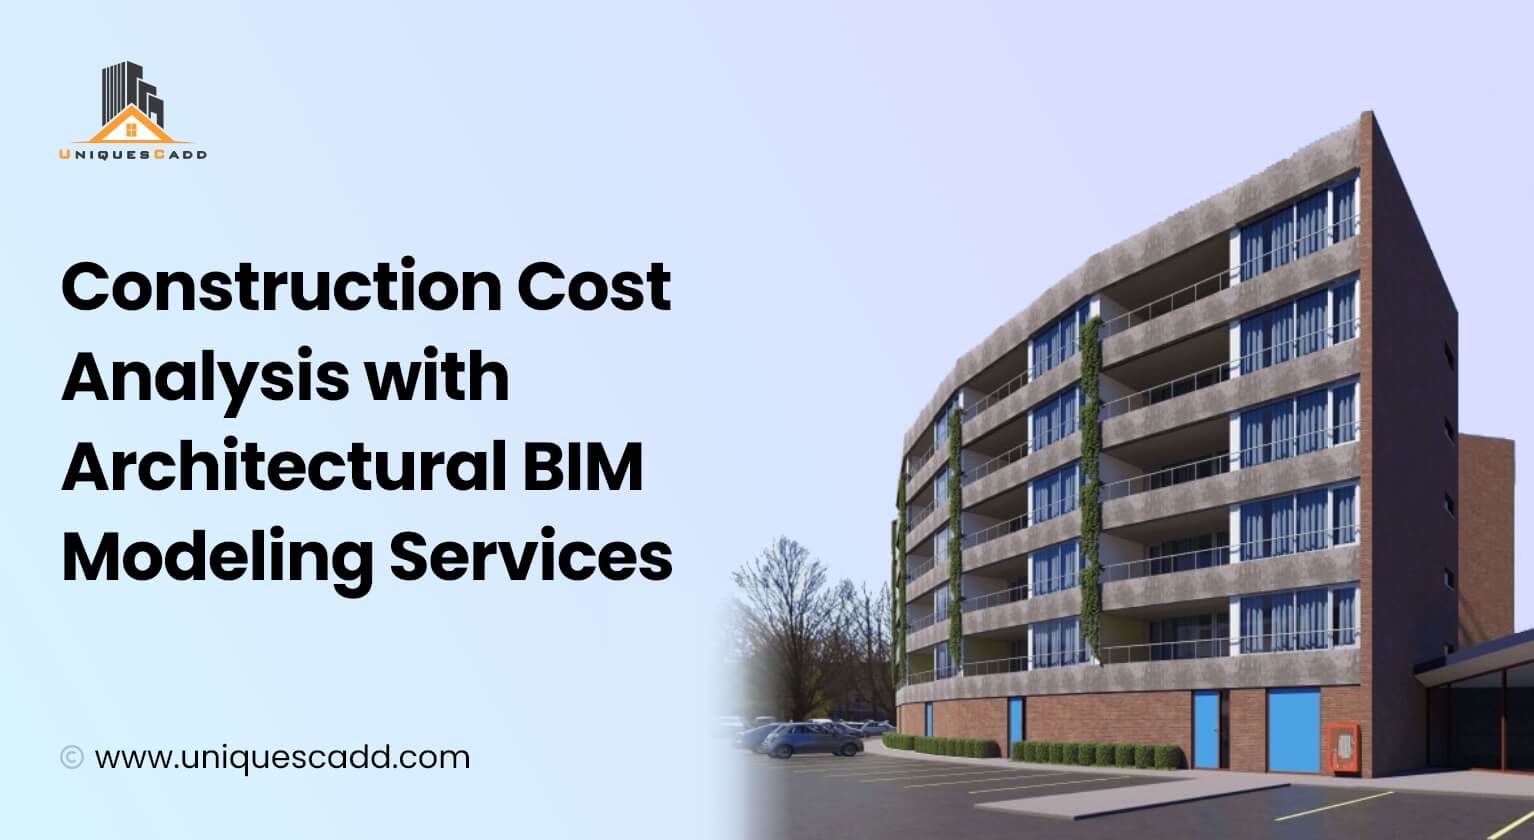 Construction Cost Analysis with Architectural BIM Modeling Services